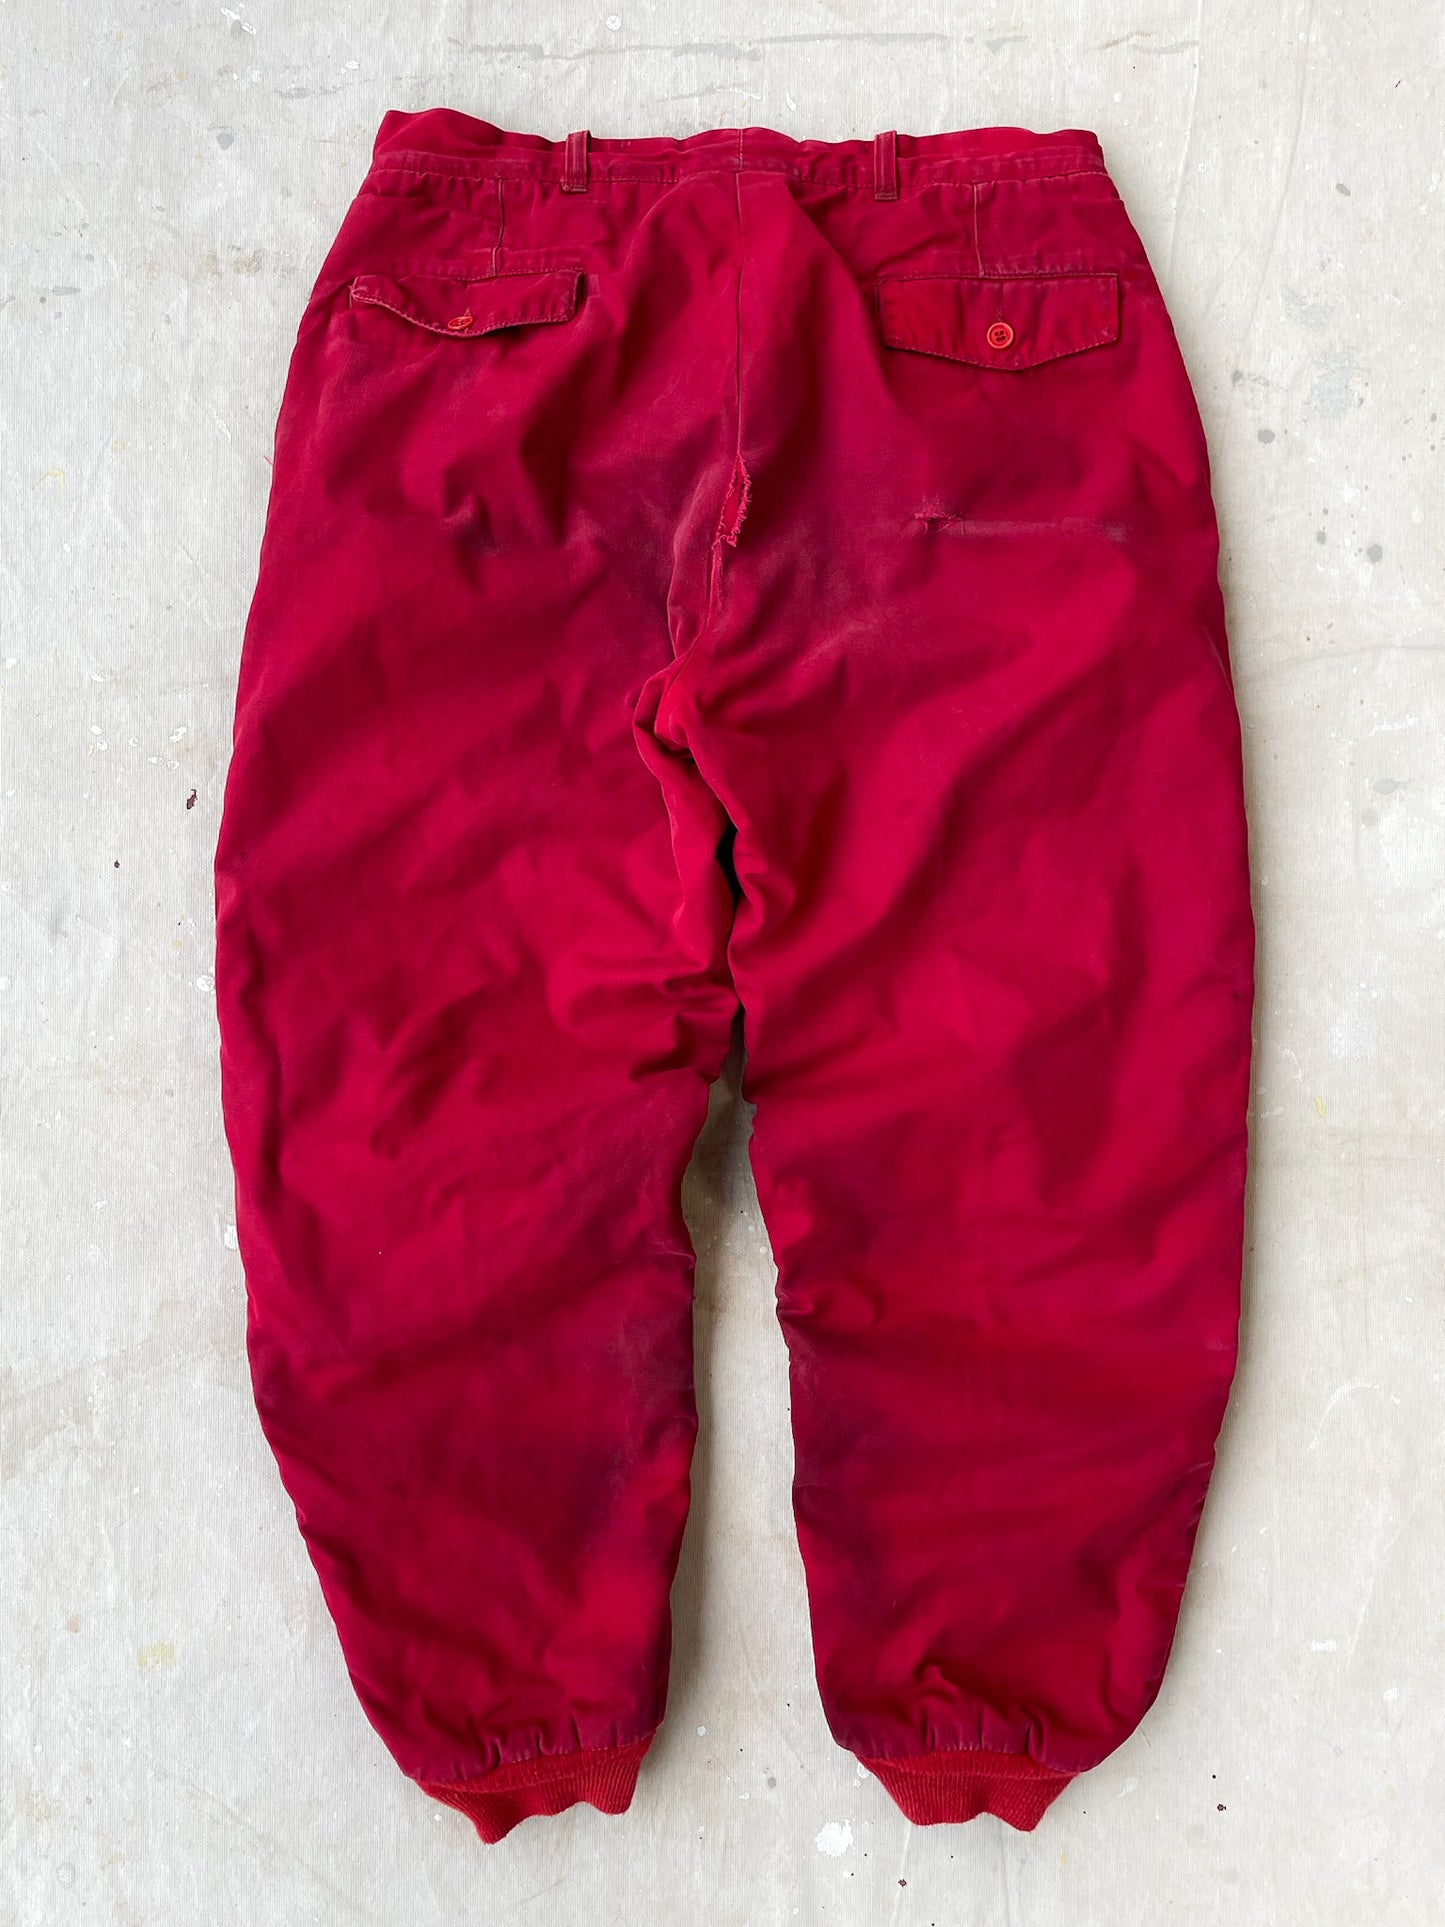 Carter's Insulated Hunting Pants—[34x30]